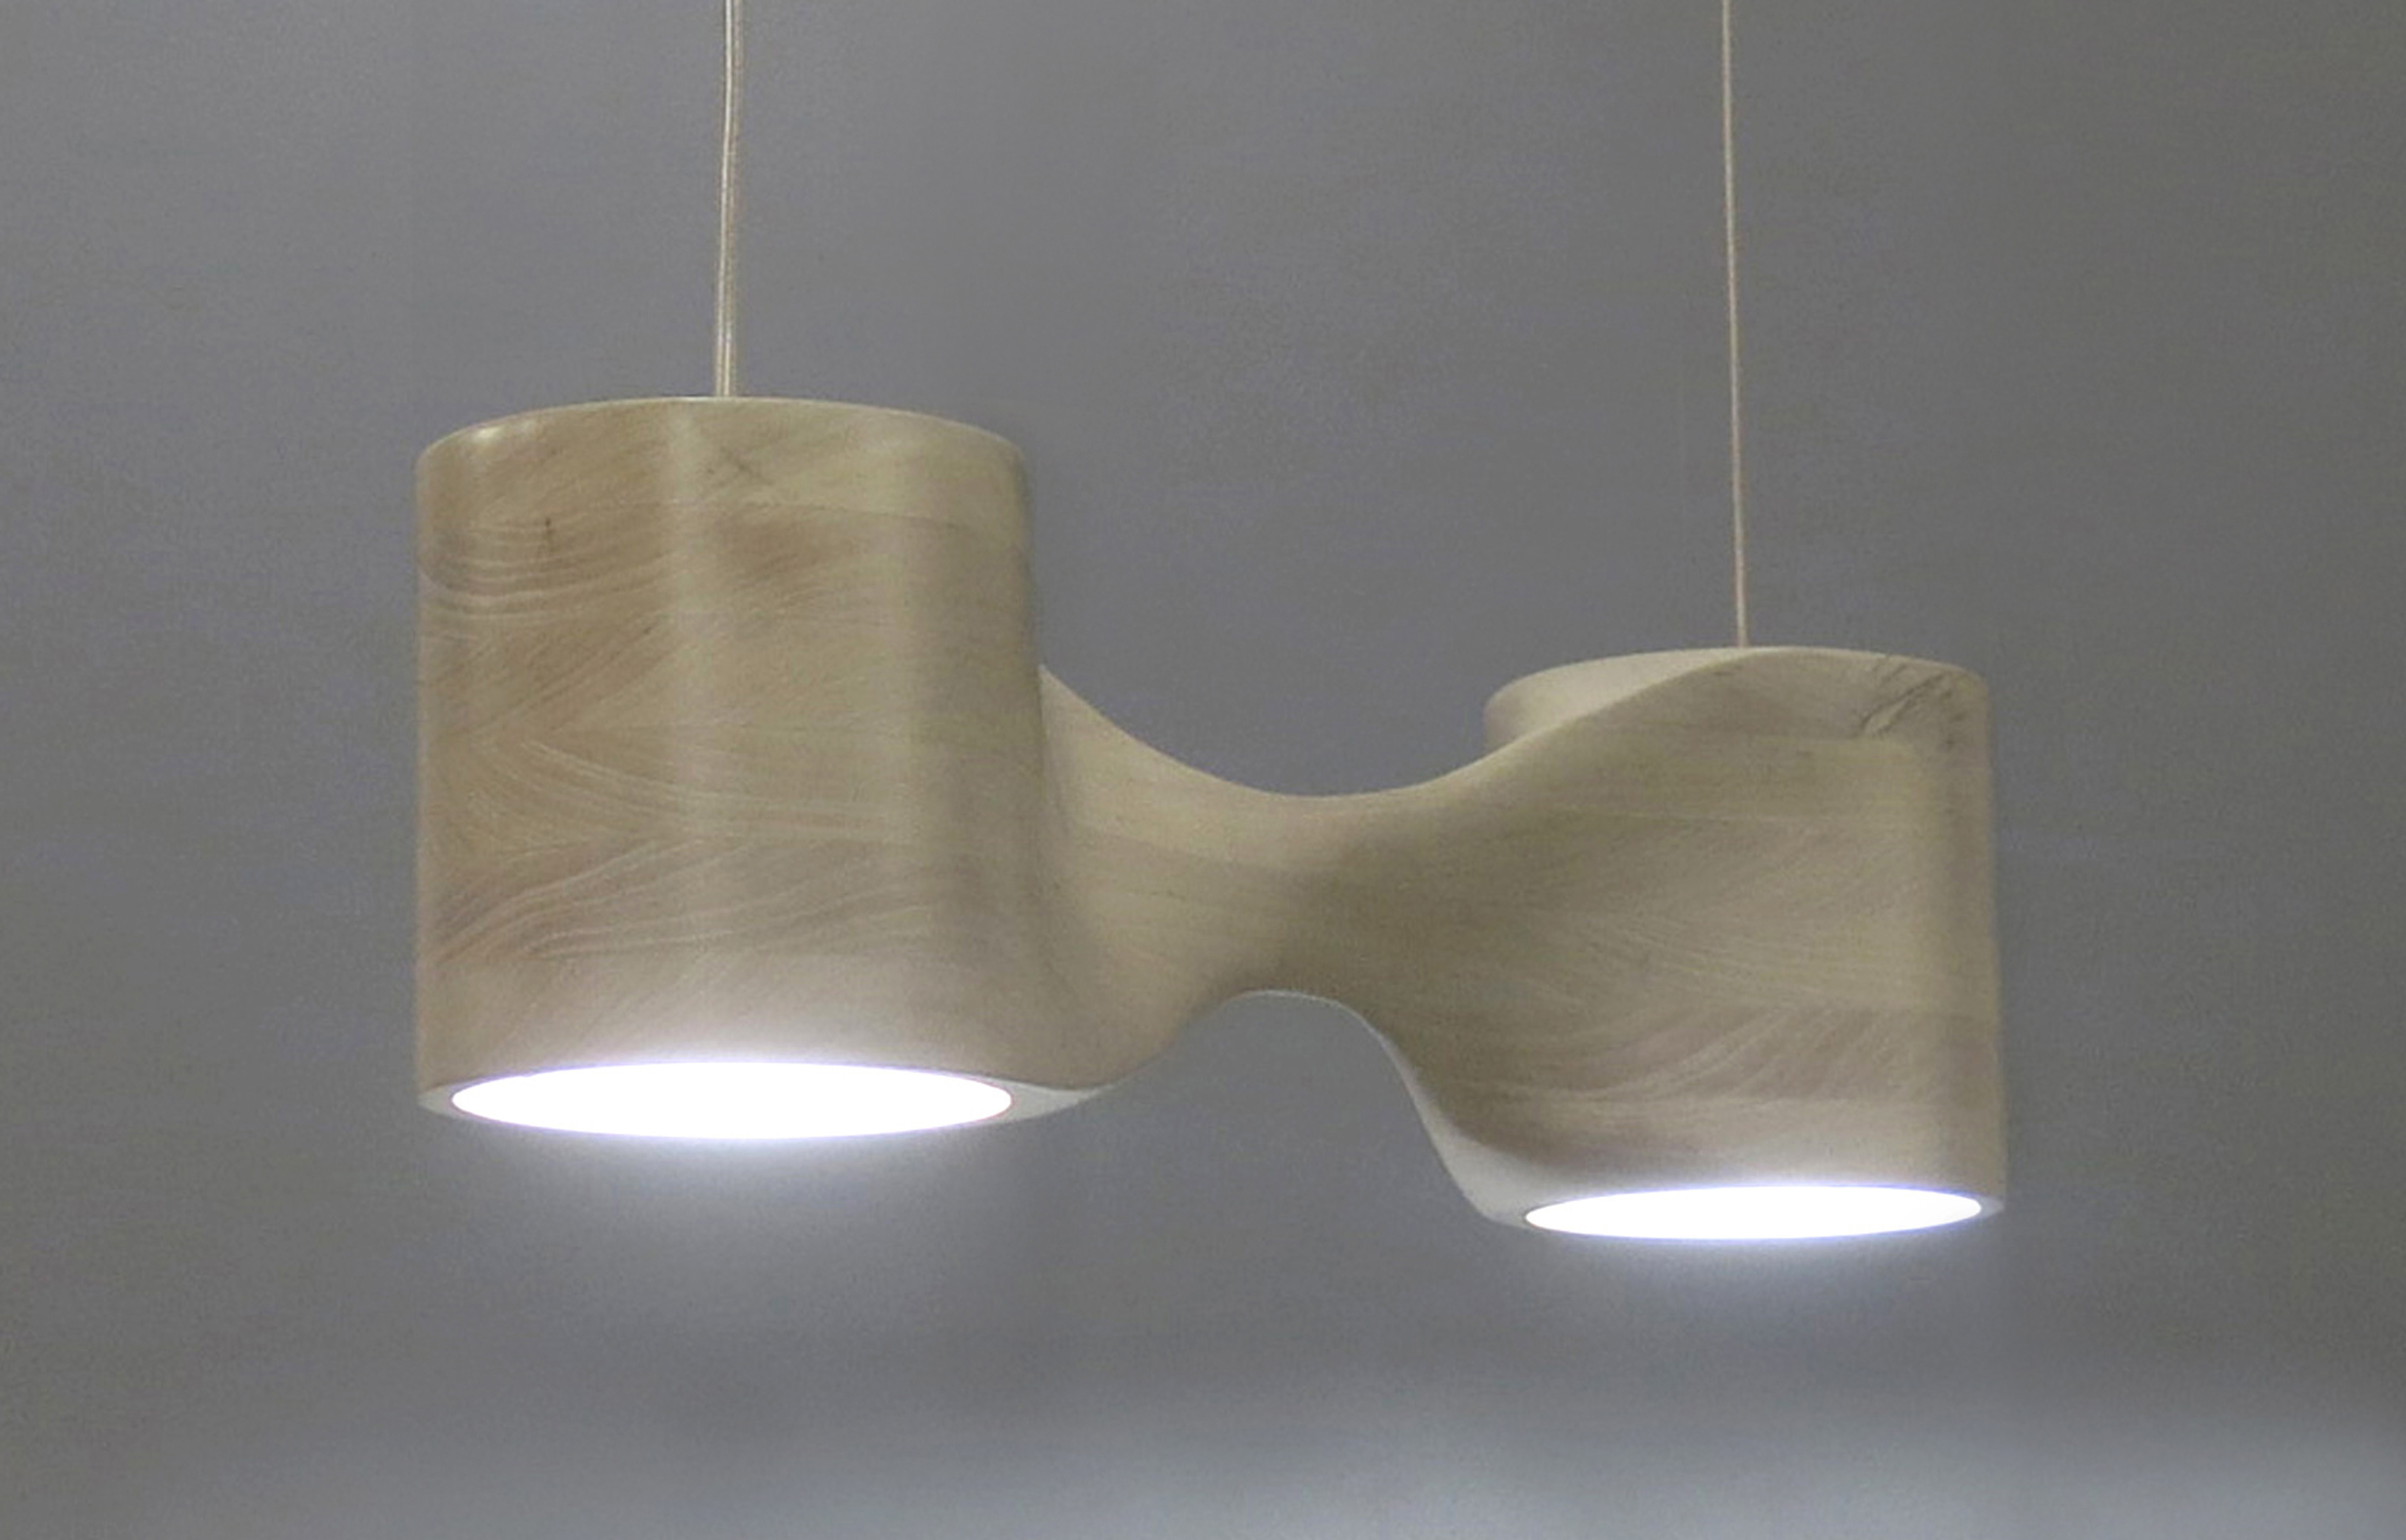 The N2 pendant lamp is shown here in bleached cherry